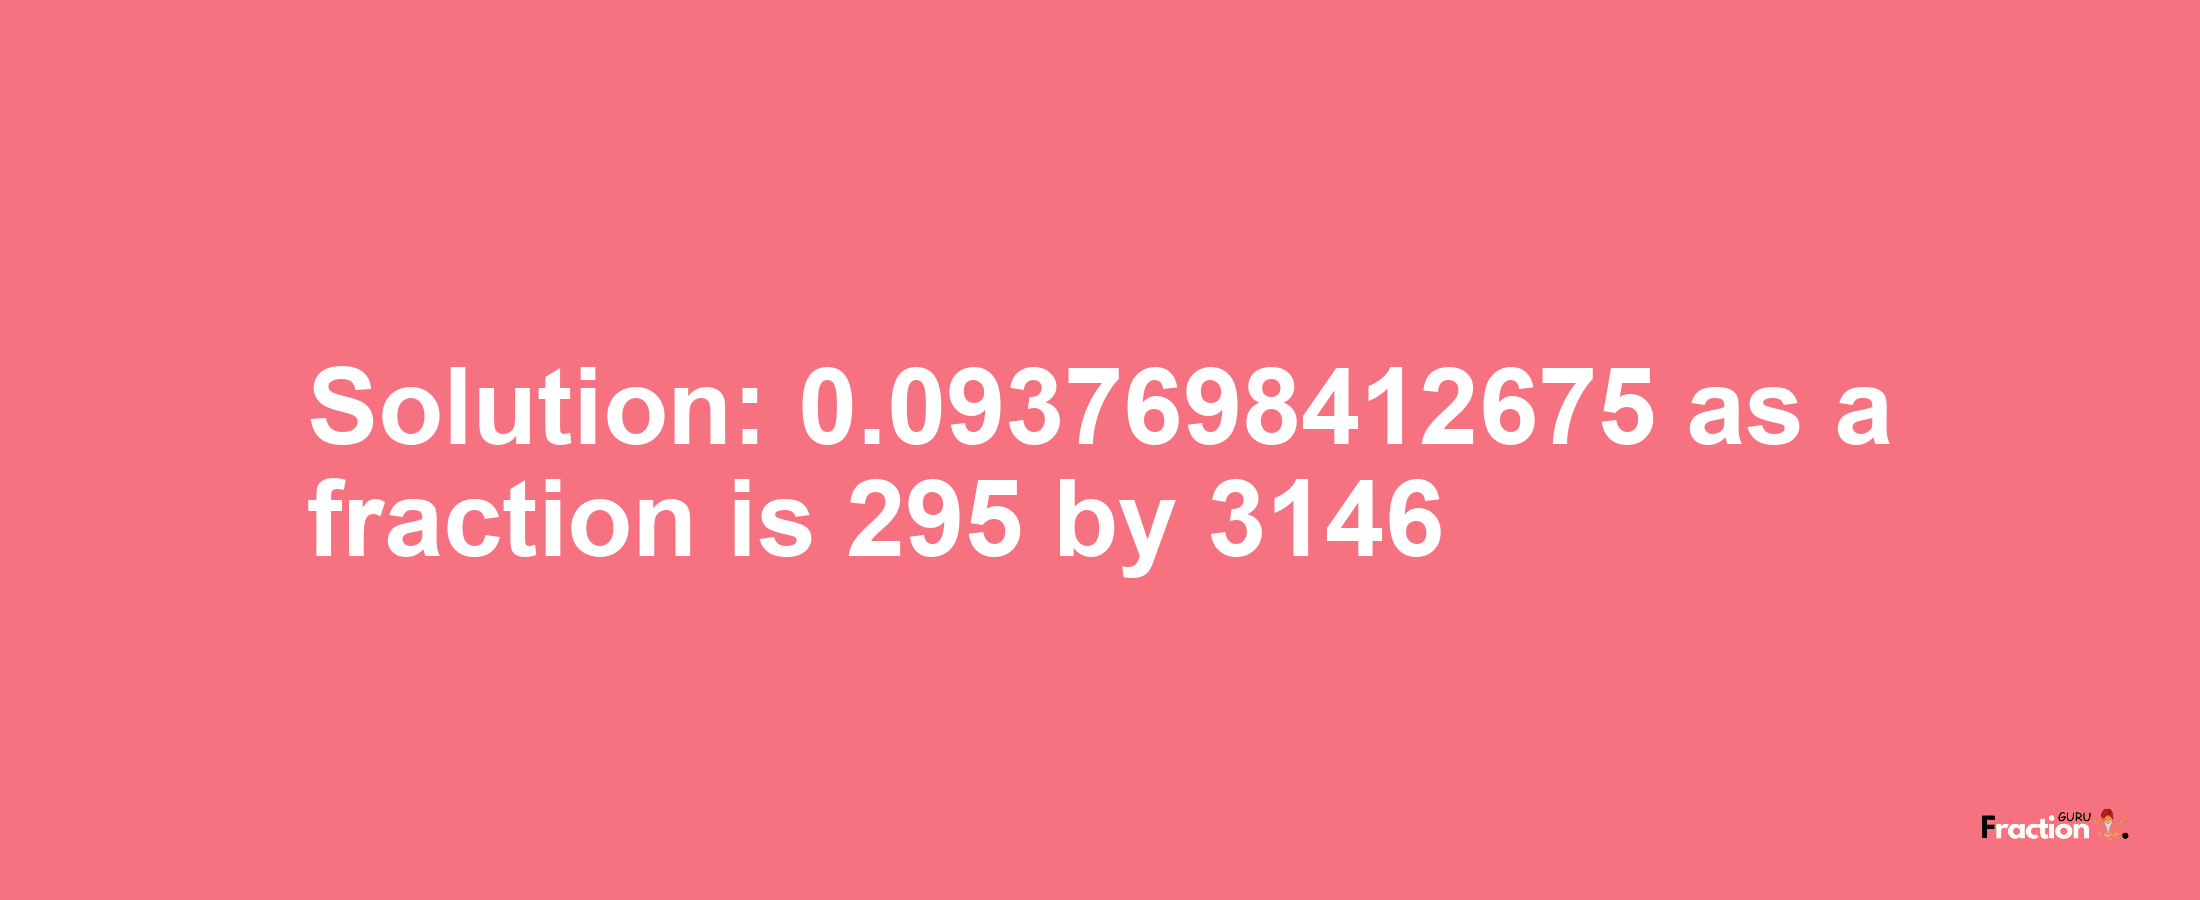 Solution:0.0937698412675 as a fraction is 295/3146